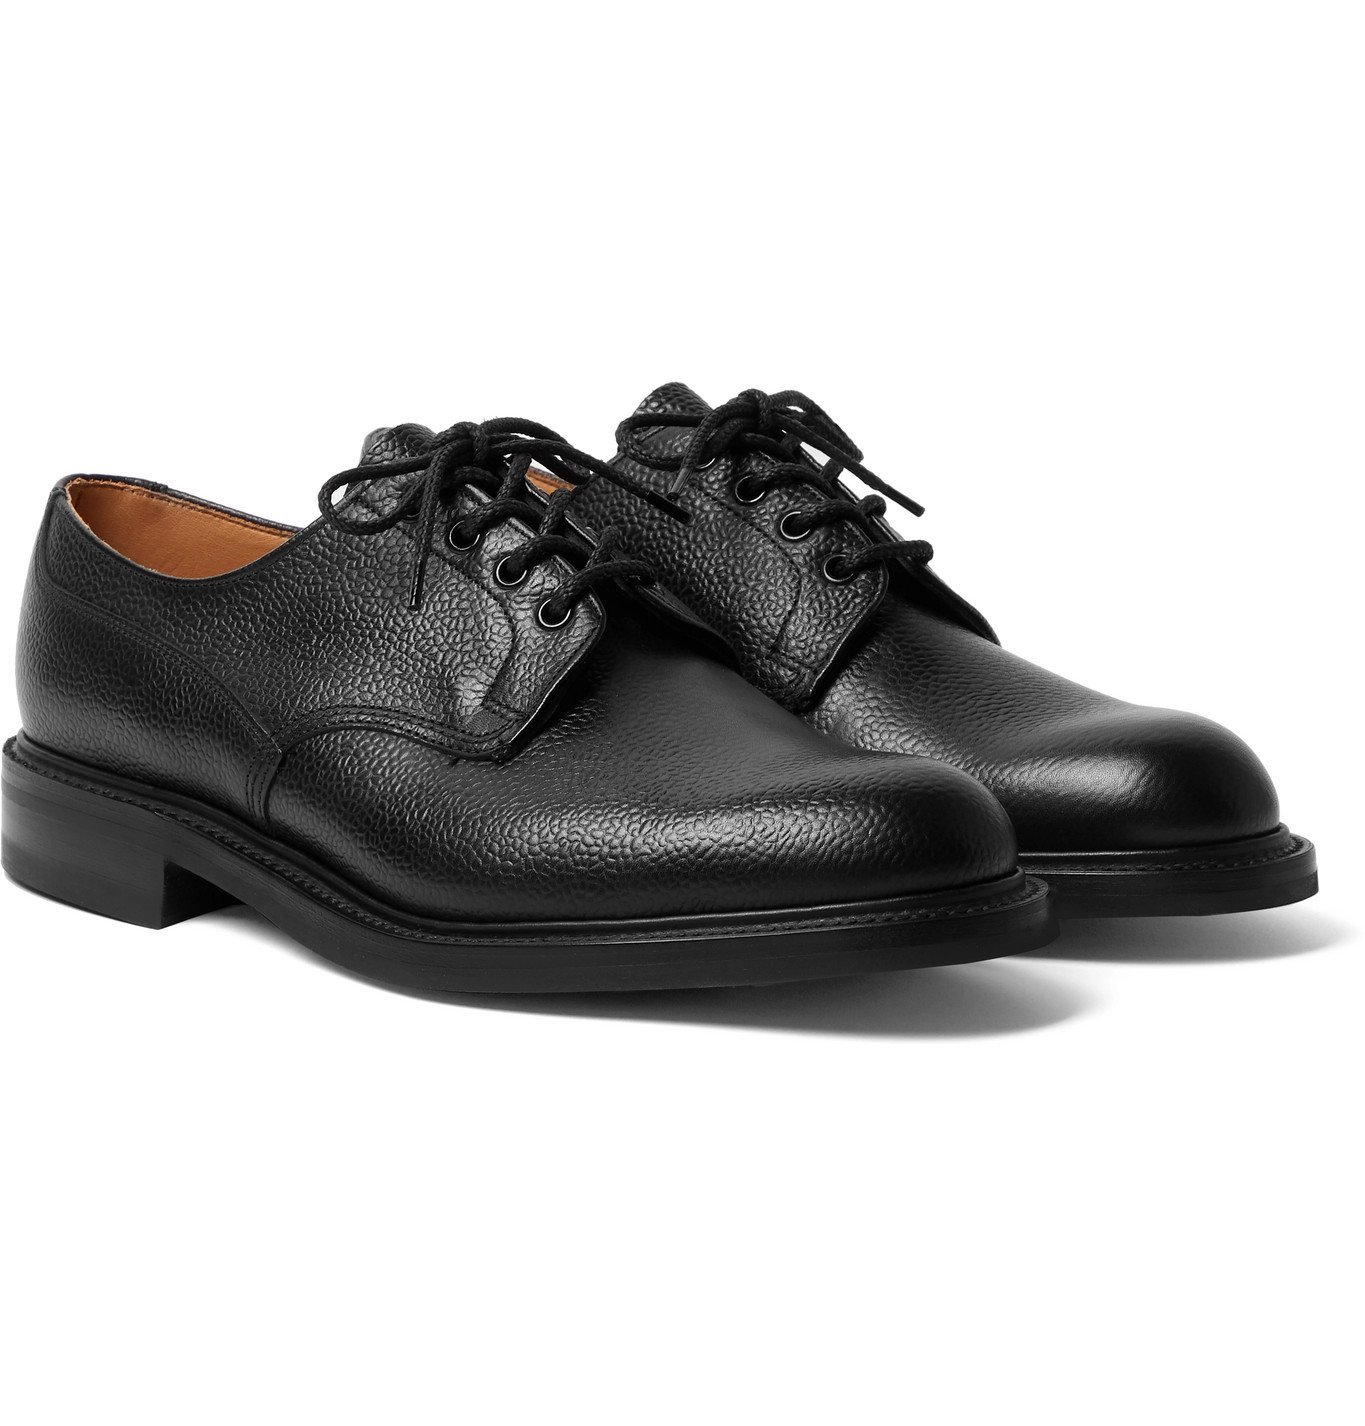 George Cleverley - Archie II Textured-Leather Derby Shoes - Black ...